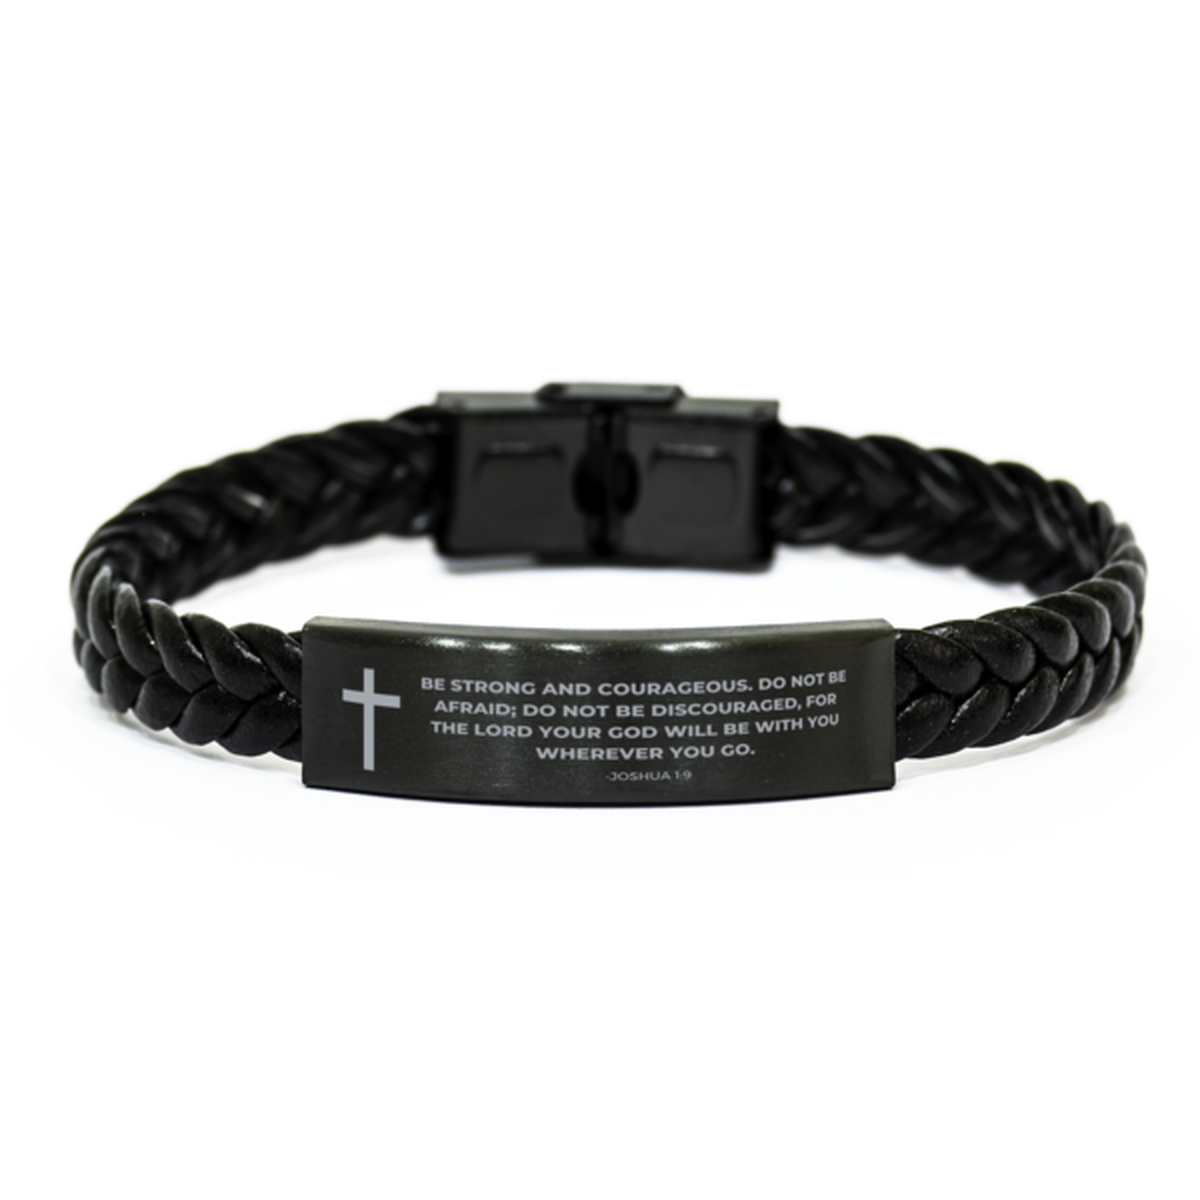 Baptism Gifts For Teenage Boys Girls, Christian Bible Verse Braided Leather Bracelet, For the lord your God will be with you, Catholic Confirmation Gifts for Son, Godson, Grandson, Nephew